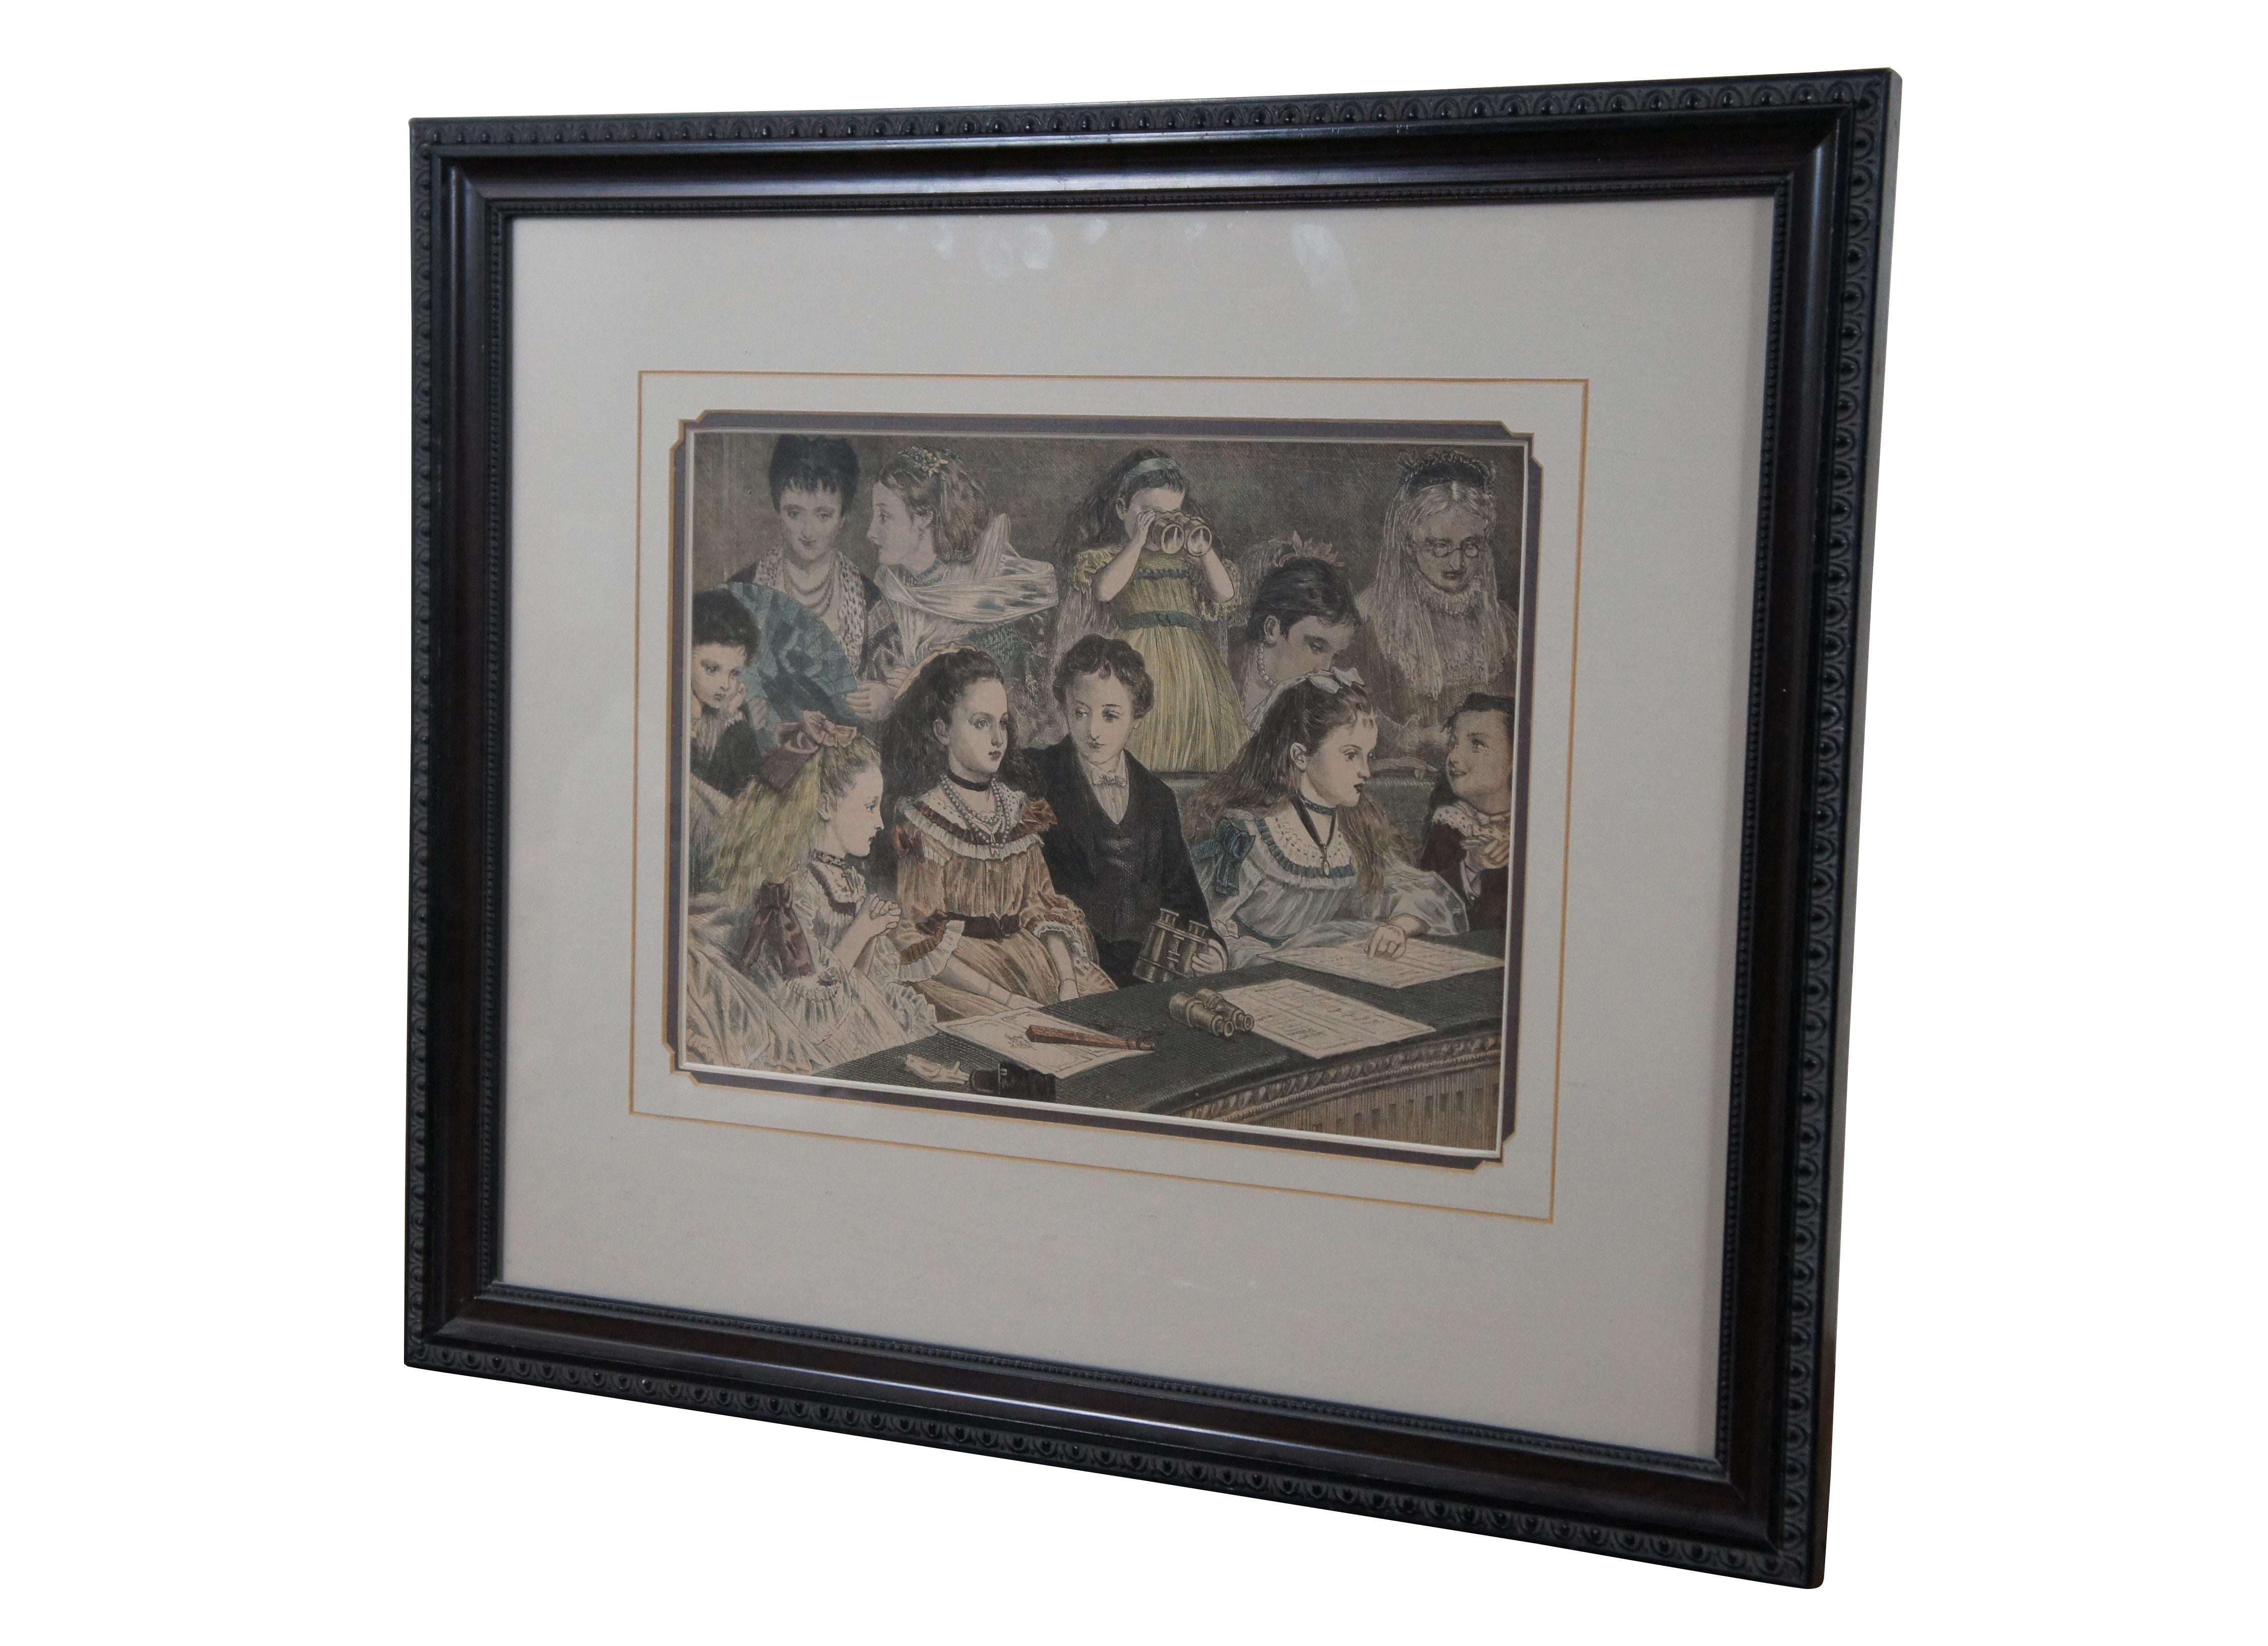 Framed late 19th century hand colored engraving depicting 